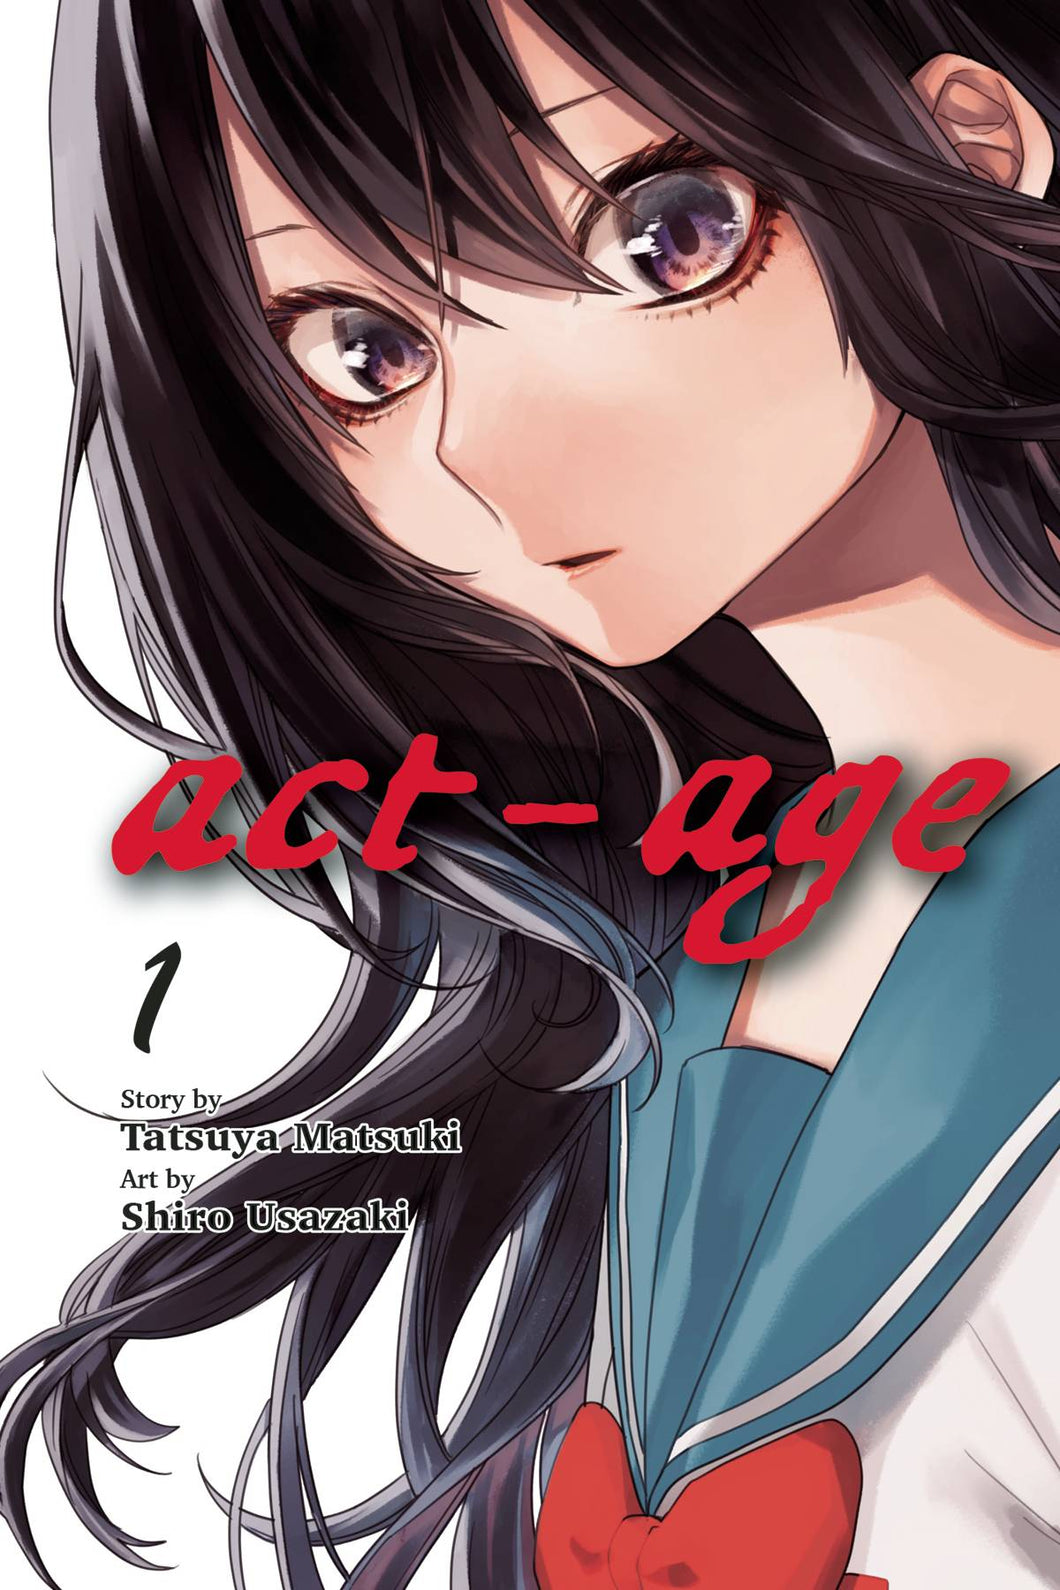 Act-Age GN Vol 01 - Books